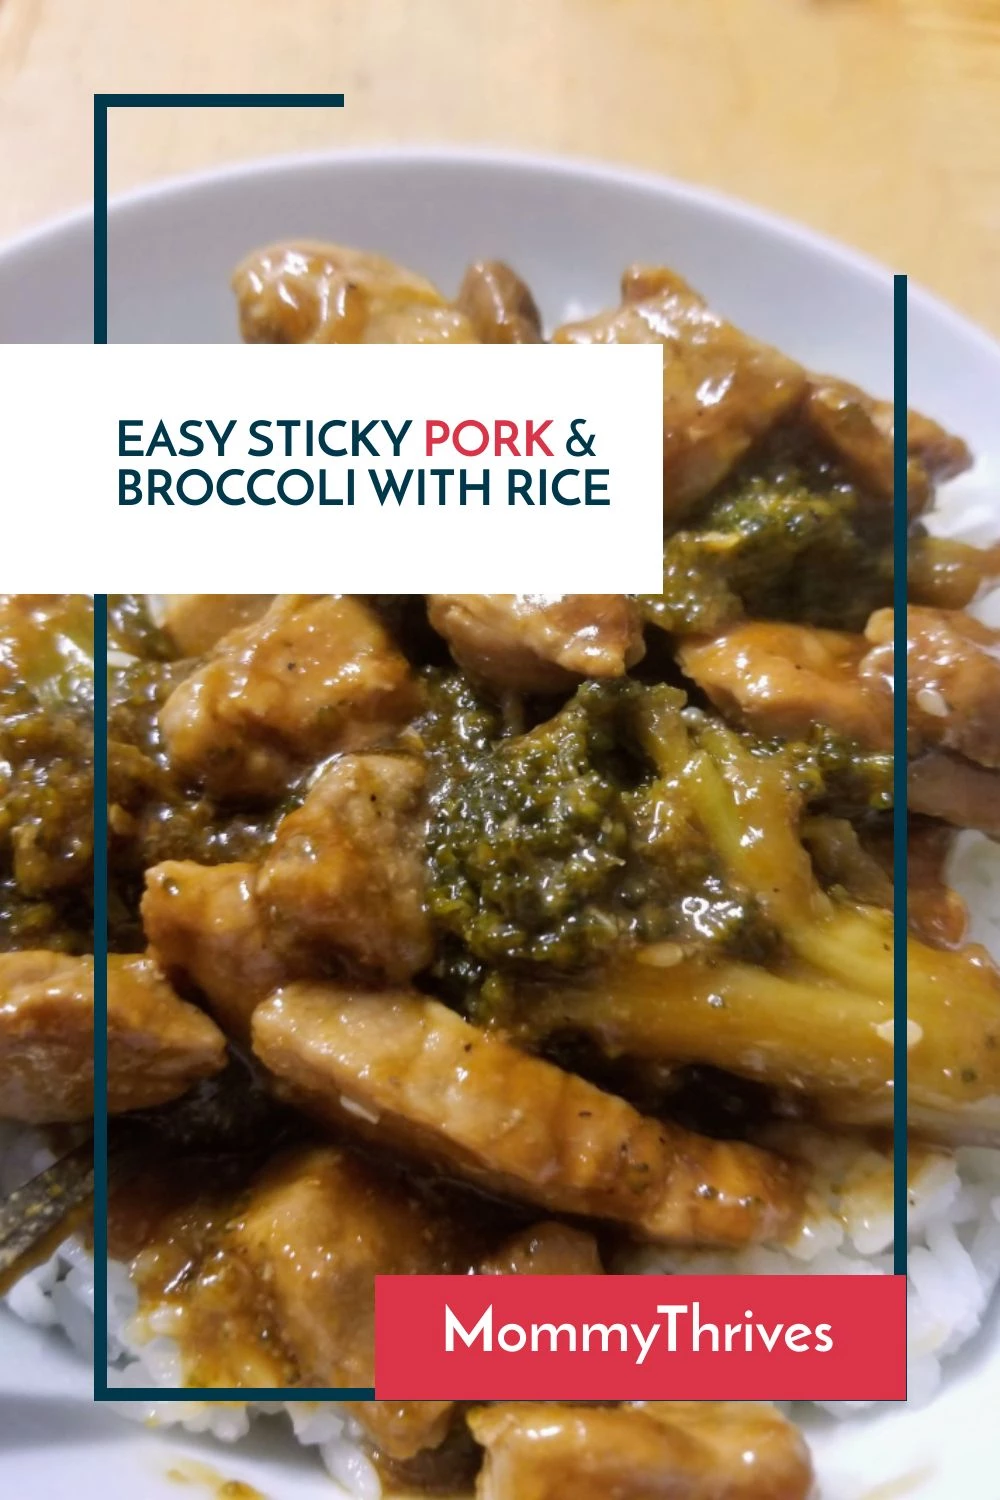 Budget Chinese Food Dinner Recipe - Easy Sticky Pork and Rice Dinner - Sticky Pork Recipe For Quick Weeknight Dinner